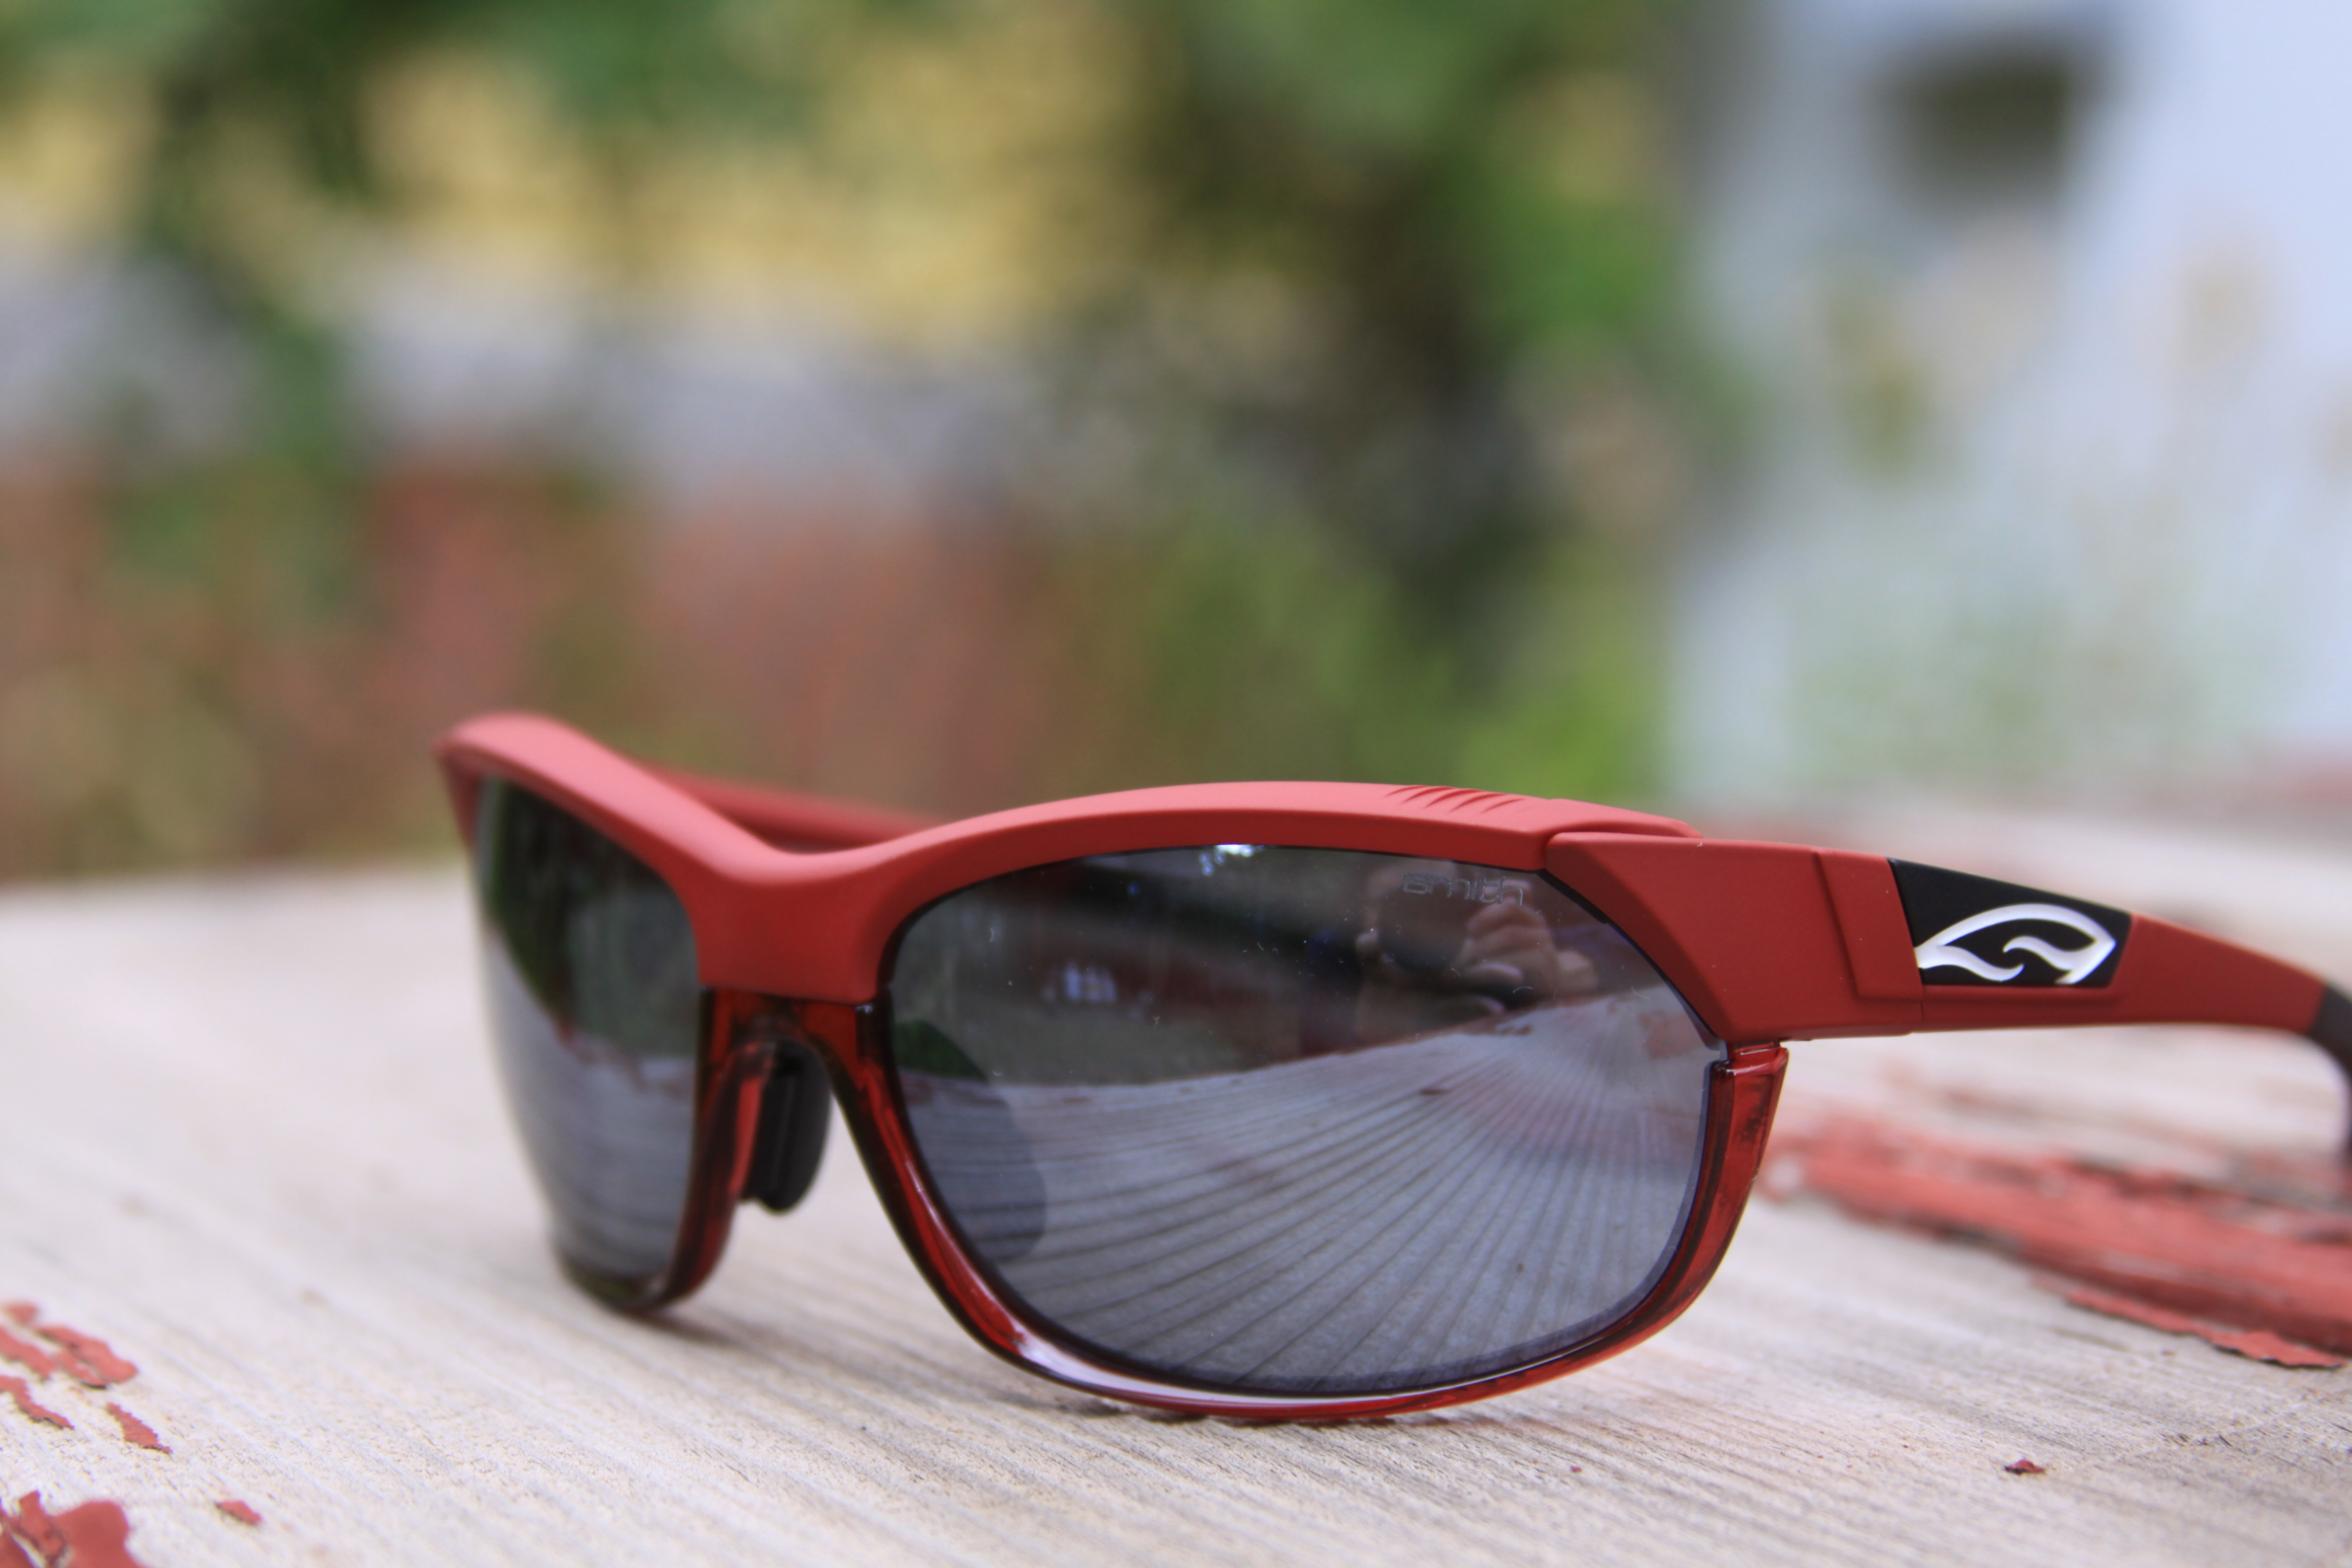 Smith Pivlock Overdrive Product Review – Finally, Good Sunglasses That Fit